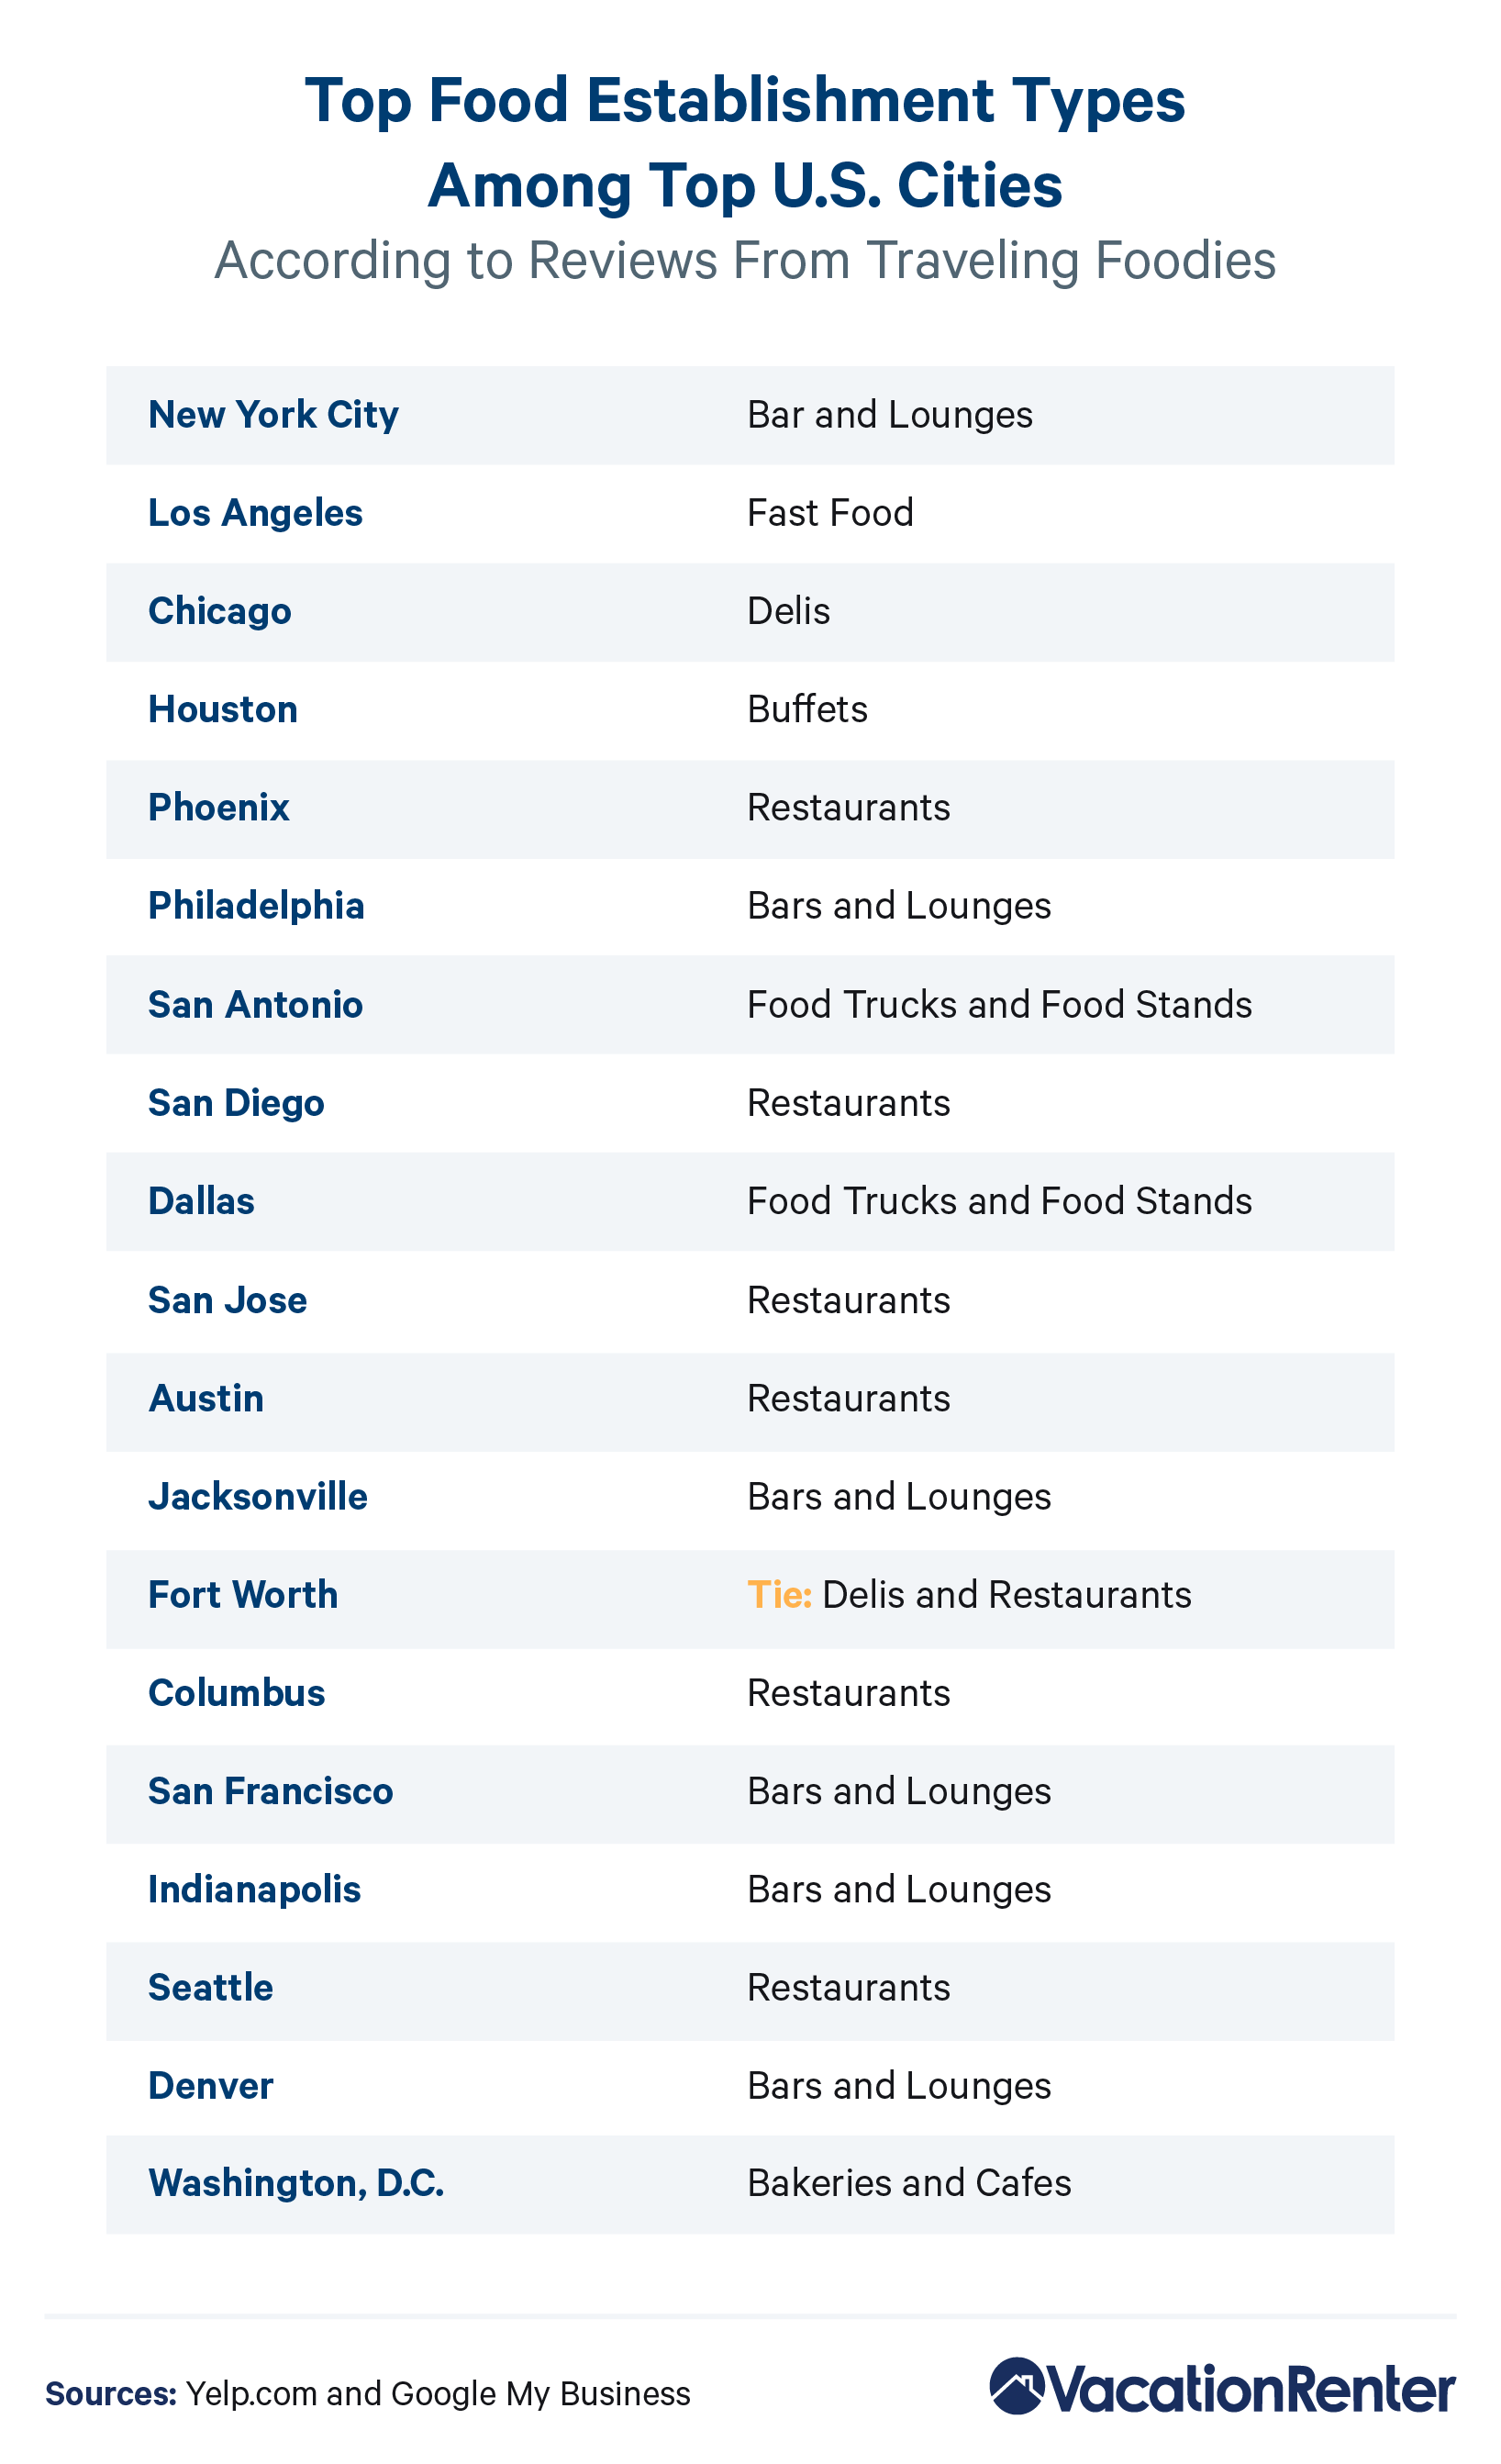 A list of the top 20 most populous U.S.cities and their highest-rated establishments, according to traveling foodies